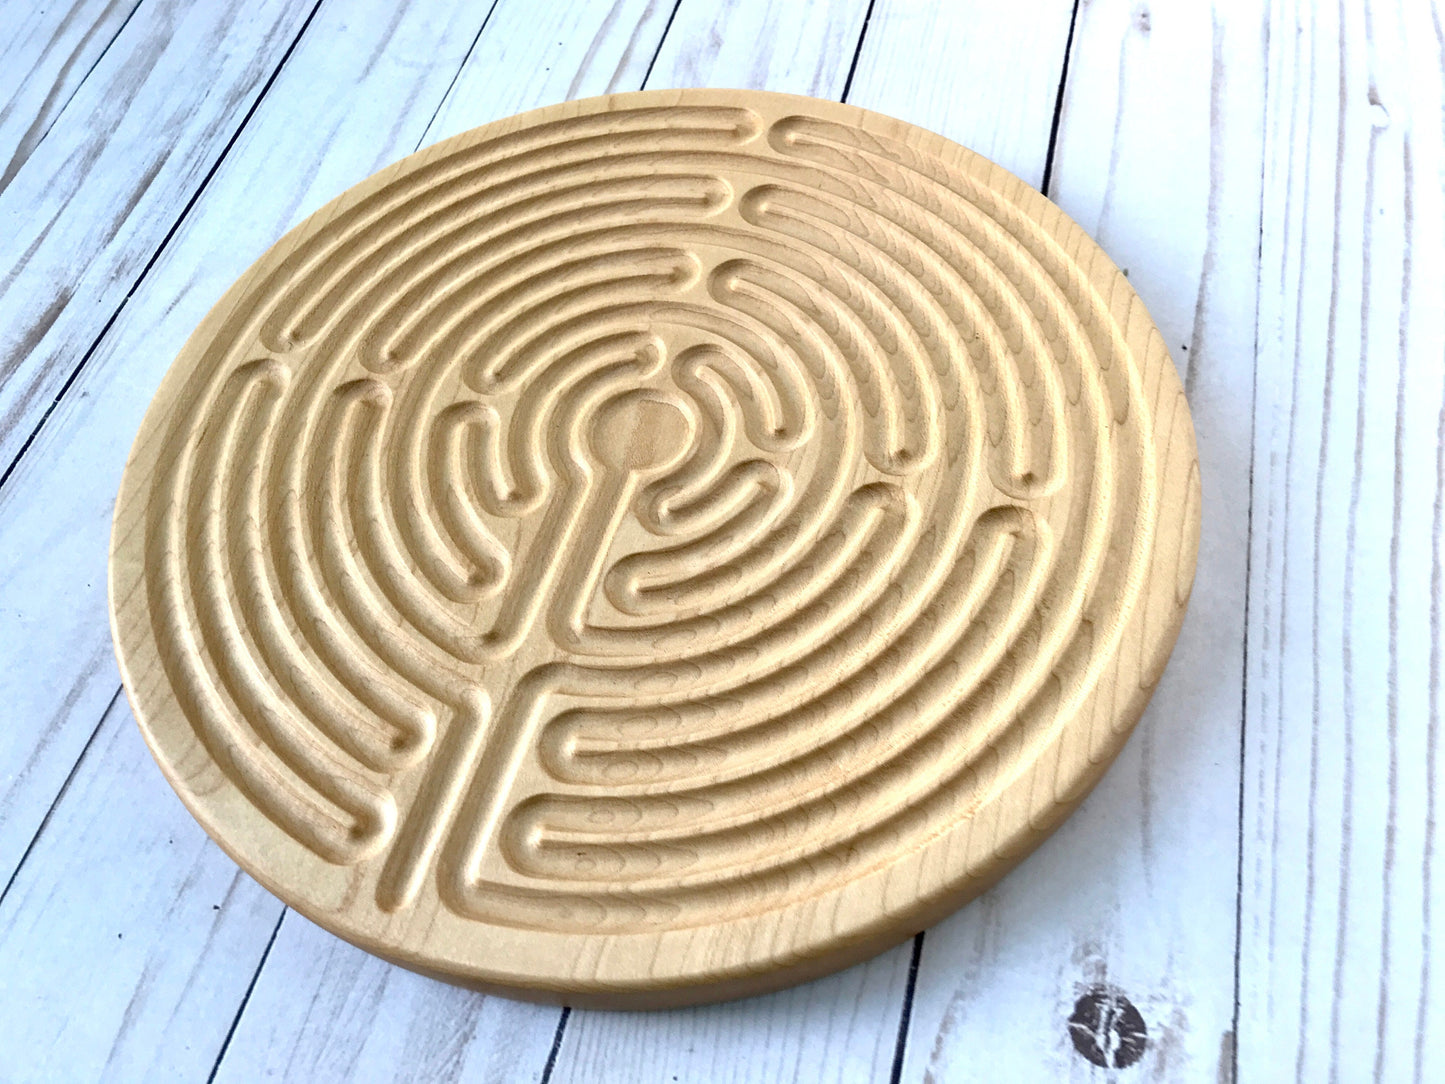 Large 11-circuit Chartres-style Finger Labyrinth, Maple/Walnut Wood, 10" diameter